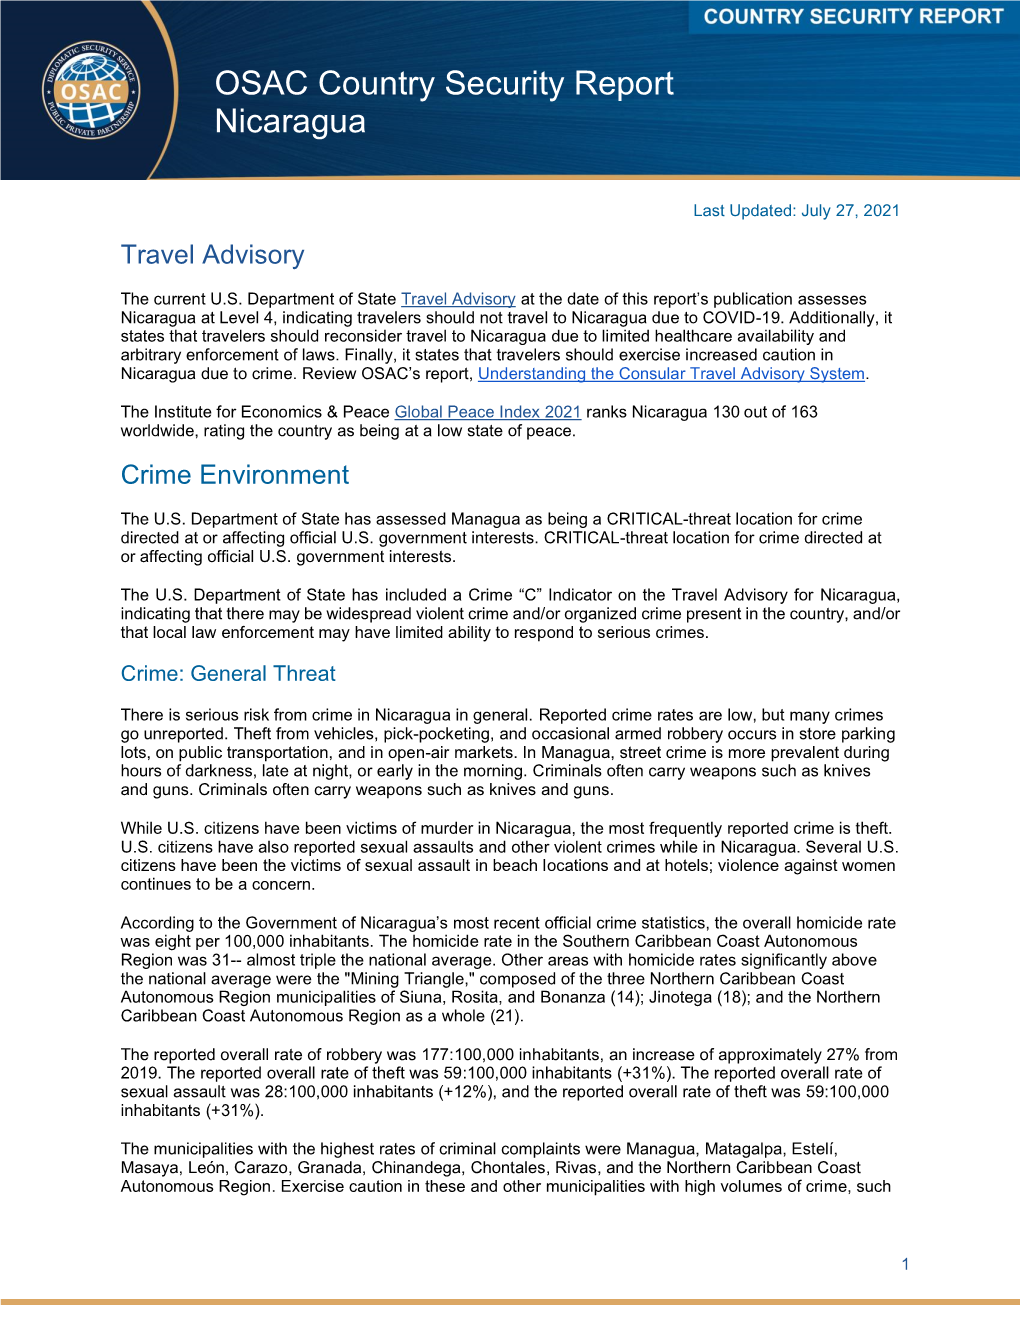 OSAC Country Security Report Nicaragua